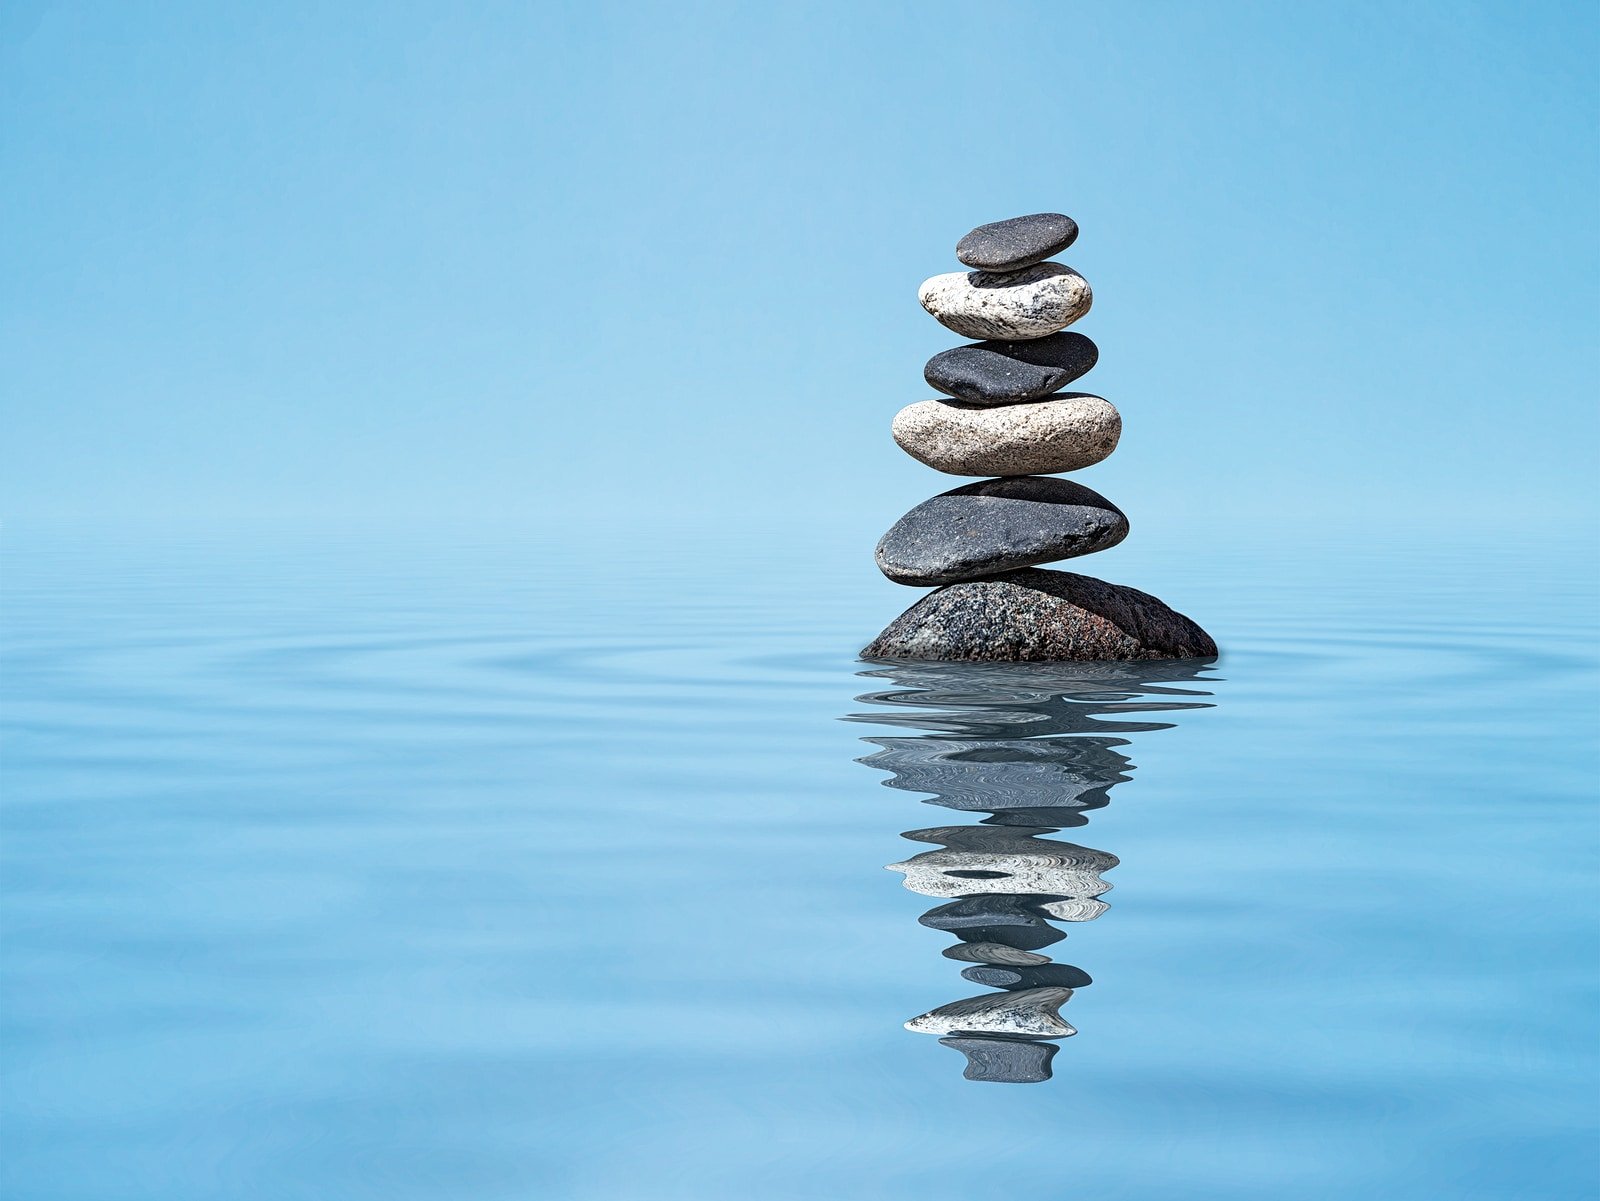 Zen meditation relaxation peacefulness peace of mind concept background - balanced stones stack in water with reflection